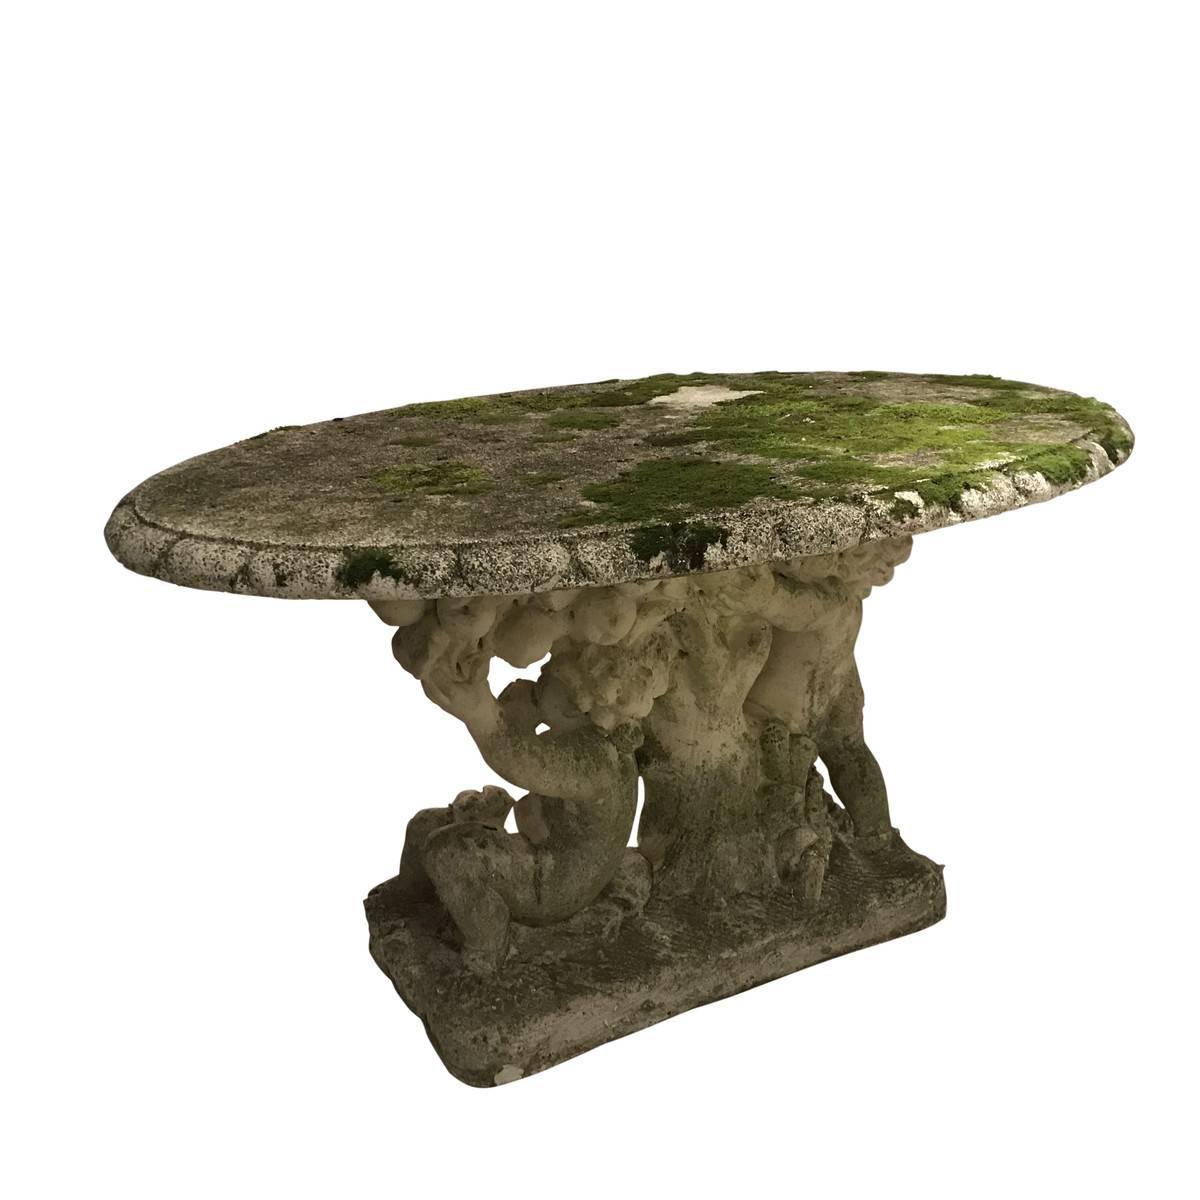 1920s Italian embracing putti's are the base to oval reconstituted marble garden table
Natural moss and spores embedded in stone provide beautiful aged patina.
 